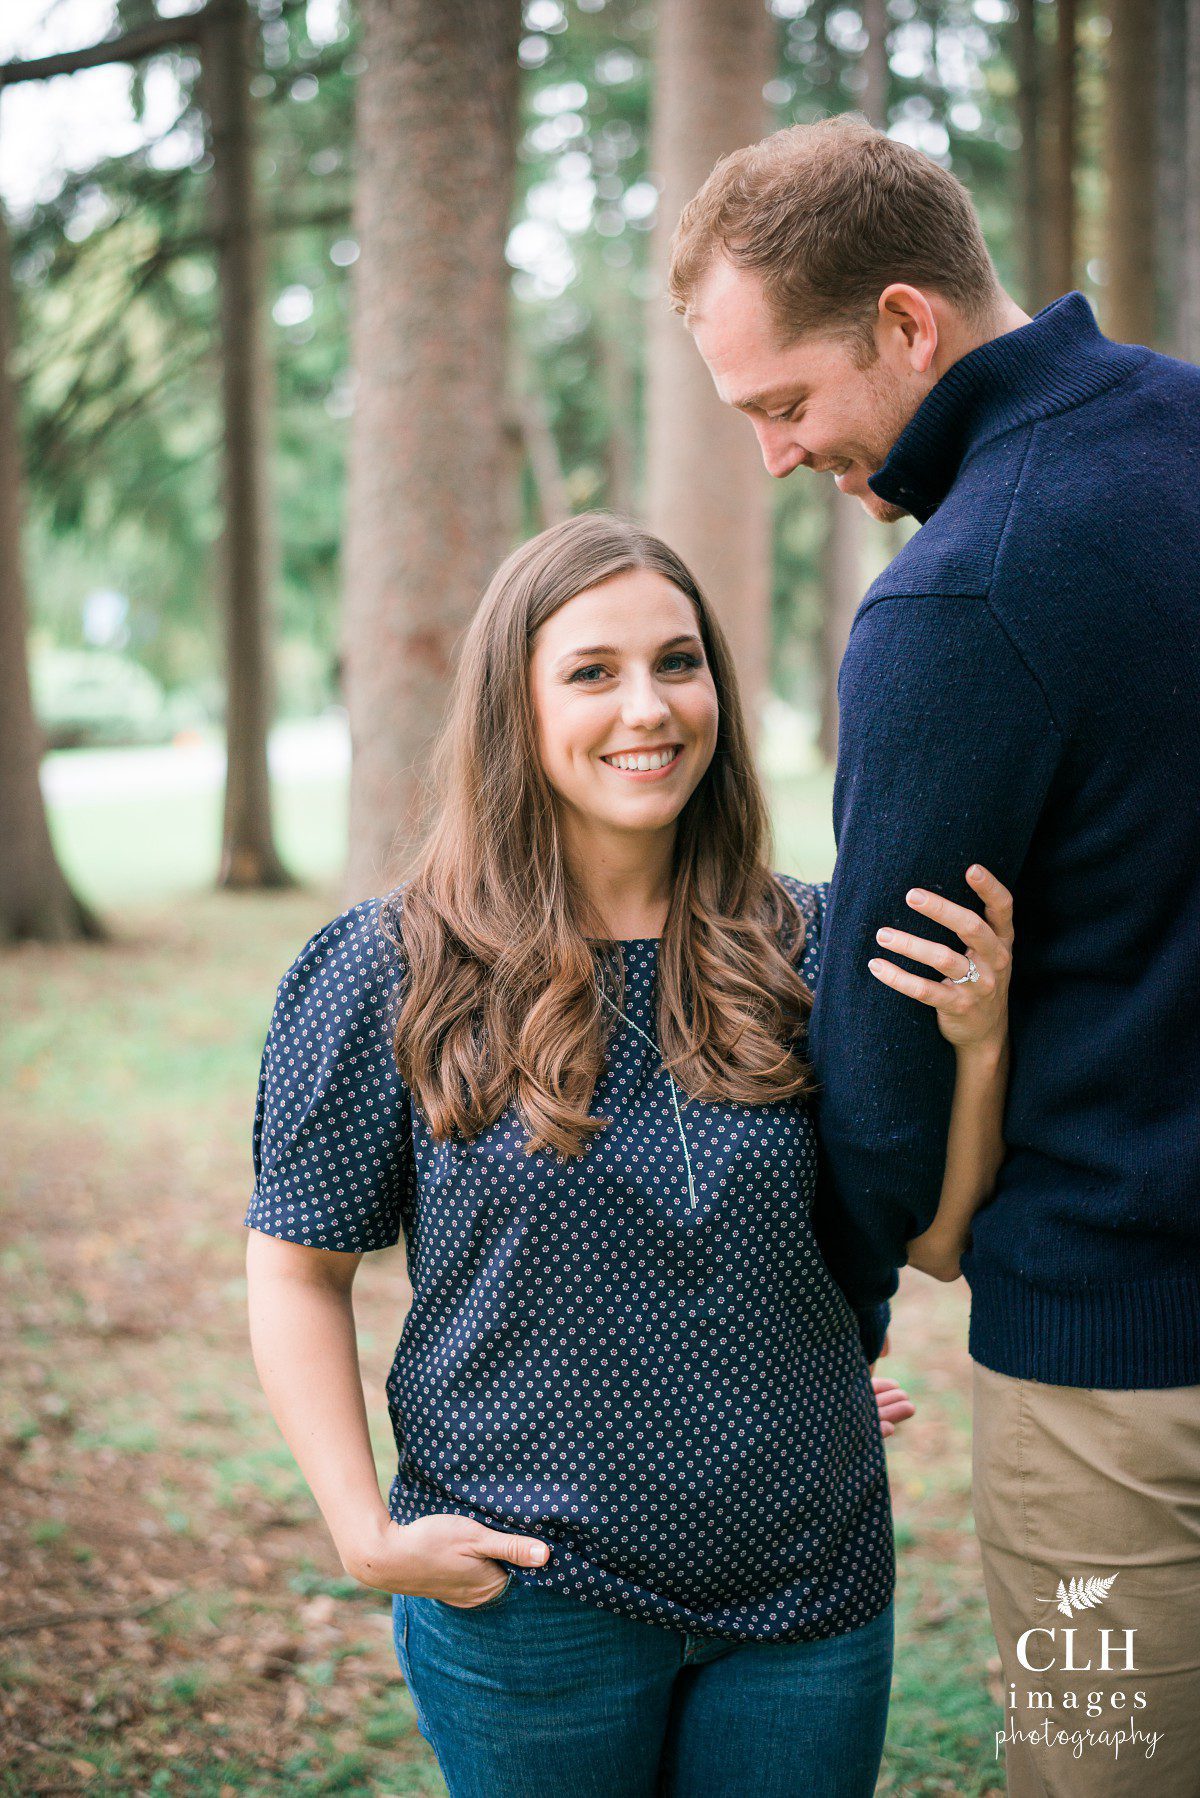 clh-images-photography-saratoga-engagement-photography-capital-district-engagement-photography-saratoga-state-park-photography-amy-and-matt-engagement-photos-5